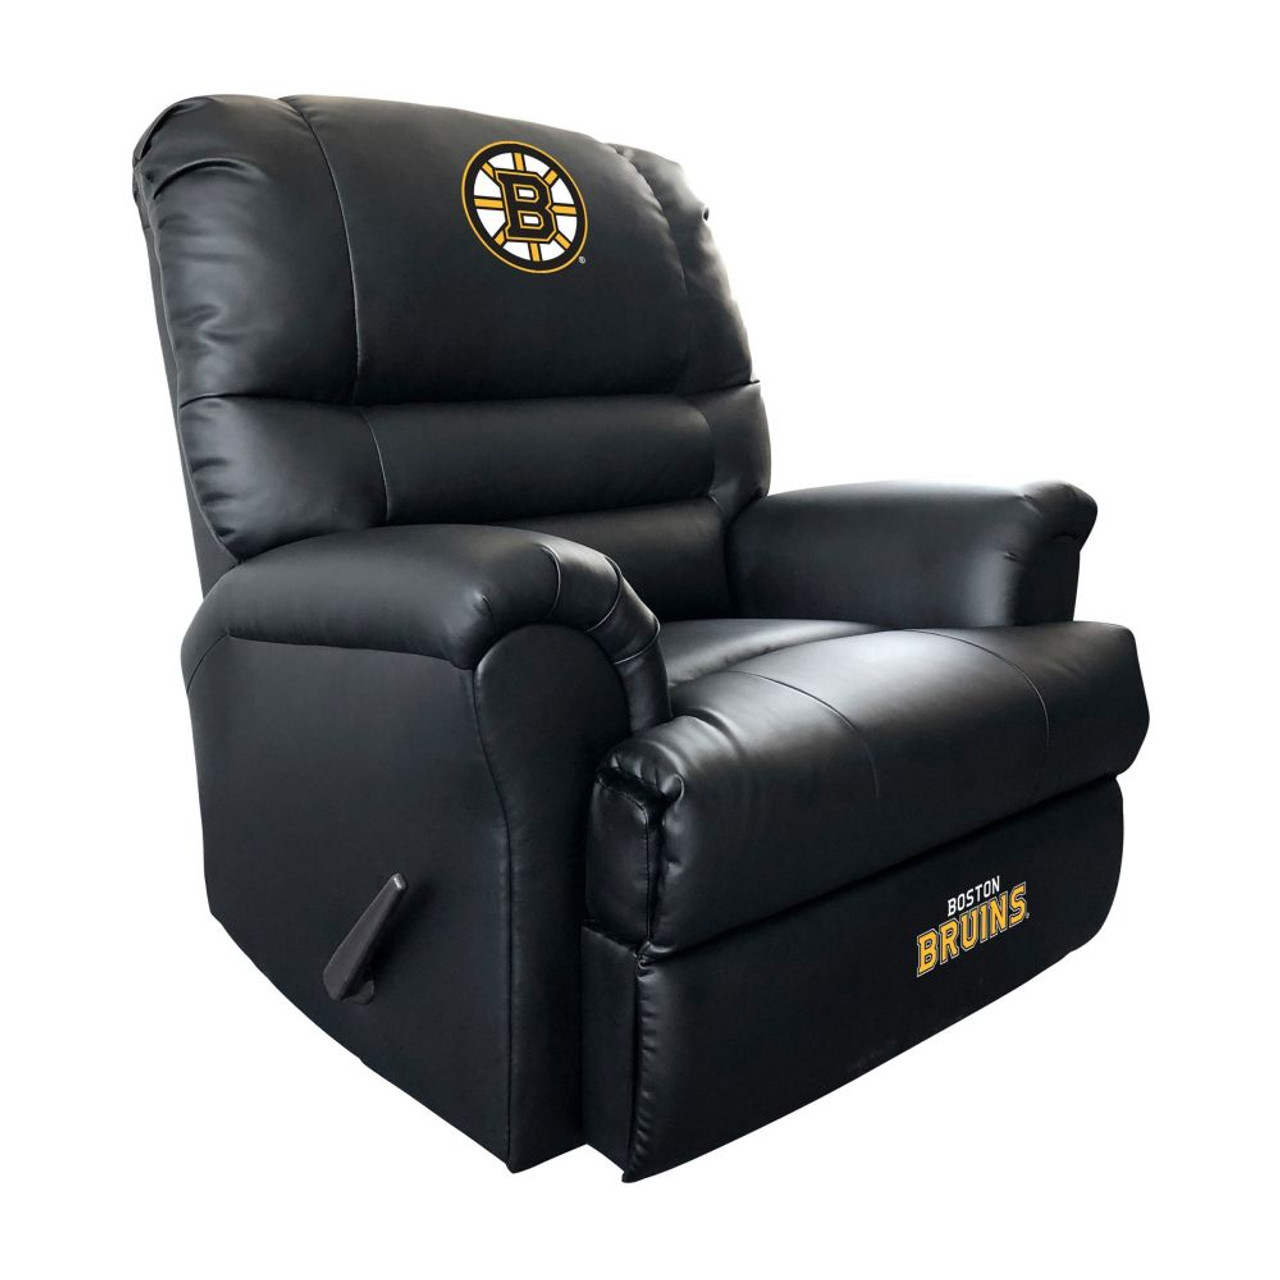 803-8001, 720801838014, Boston, BOS, Bruins, Sports, Recliner, NHL, Imperial